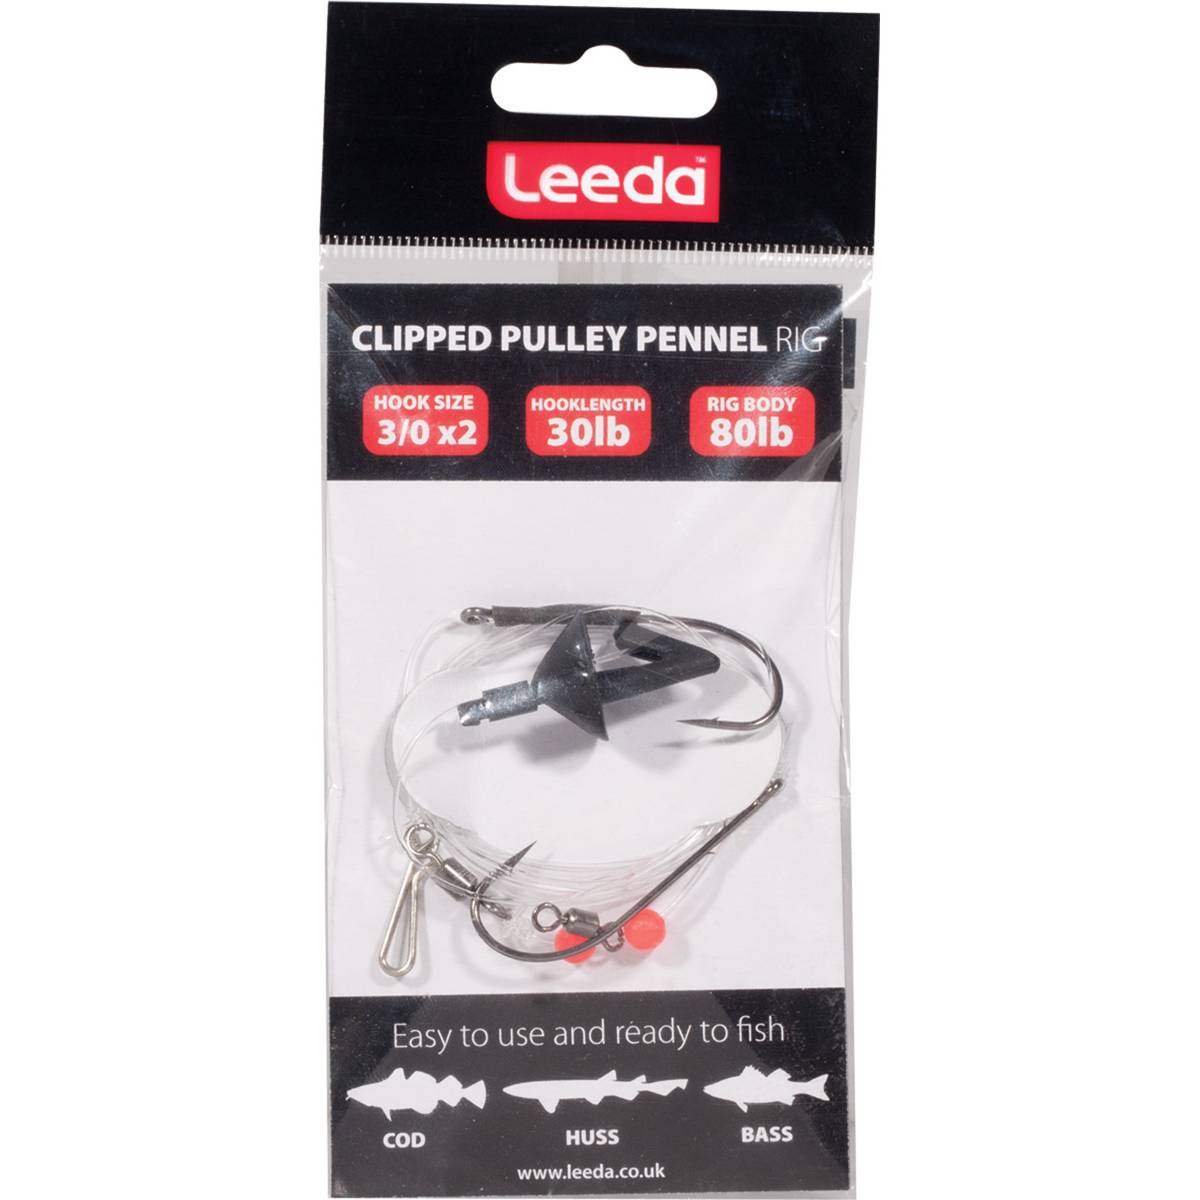 Leeda Clipped Pulley Pennel